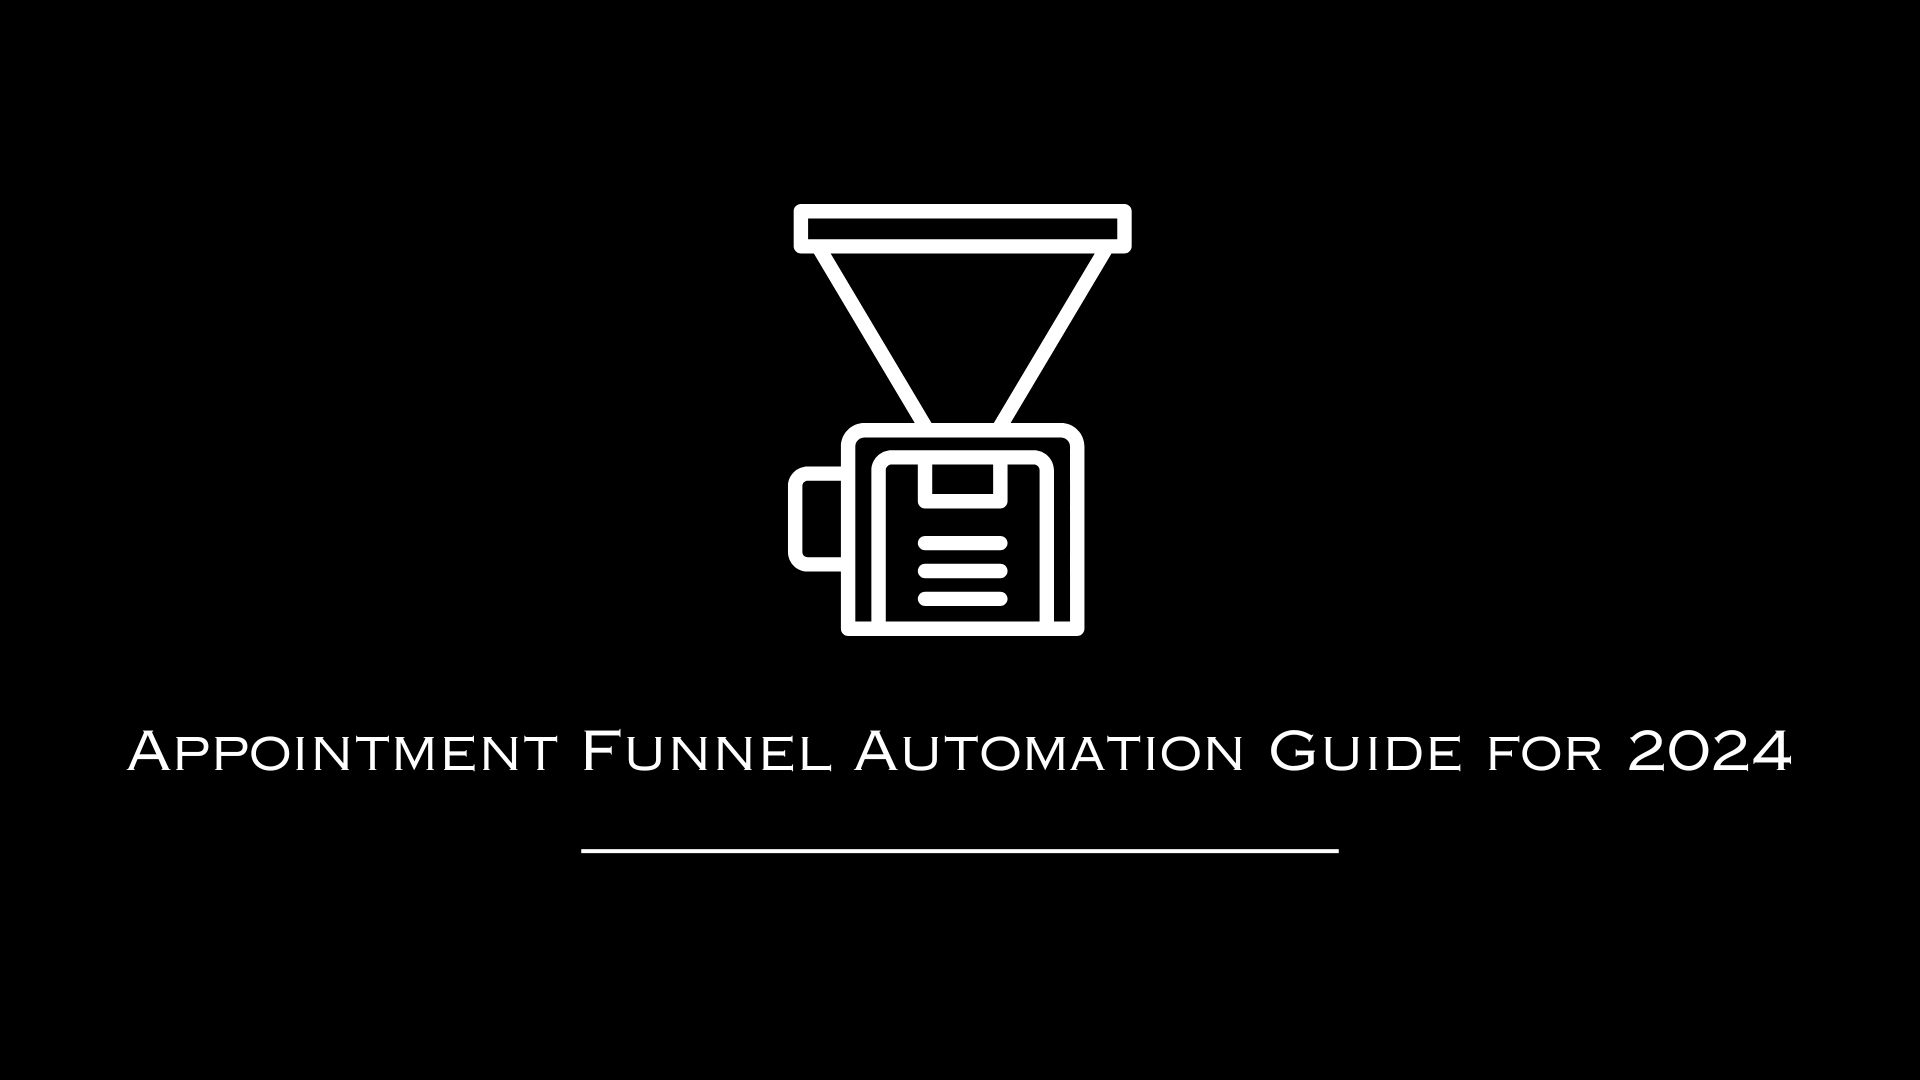 Appointment Funnel Automation Guide for 2024